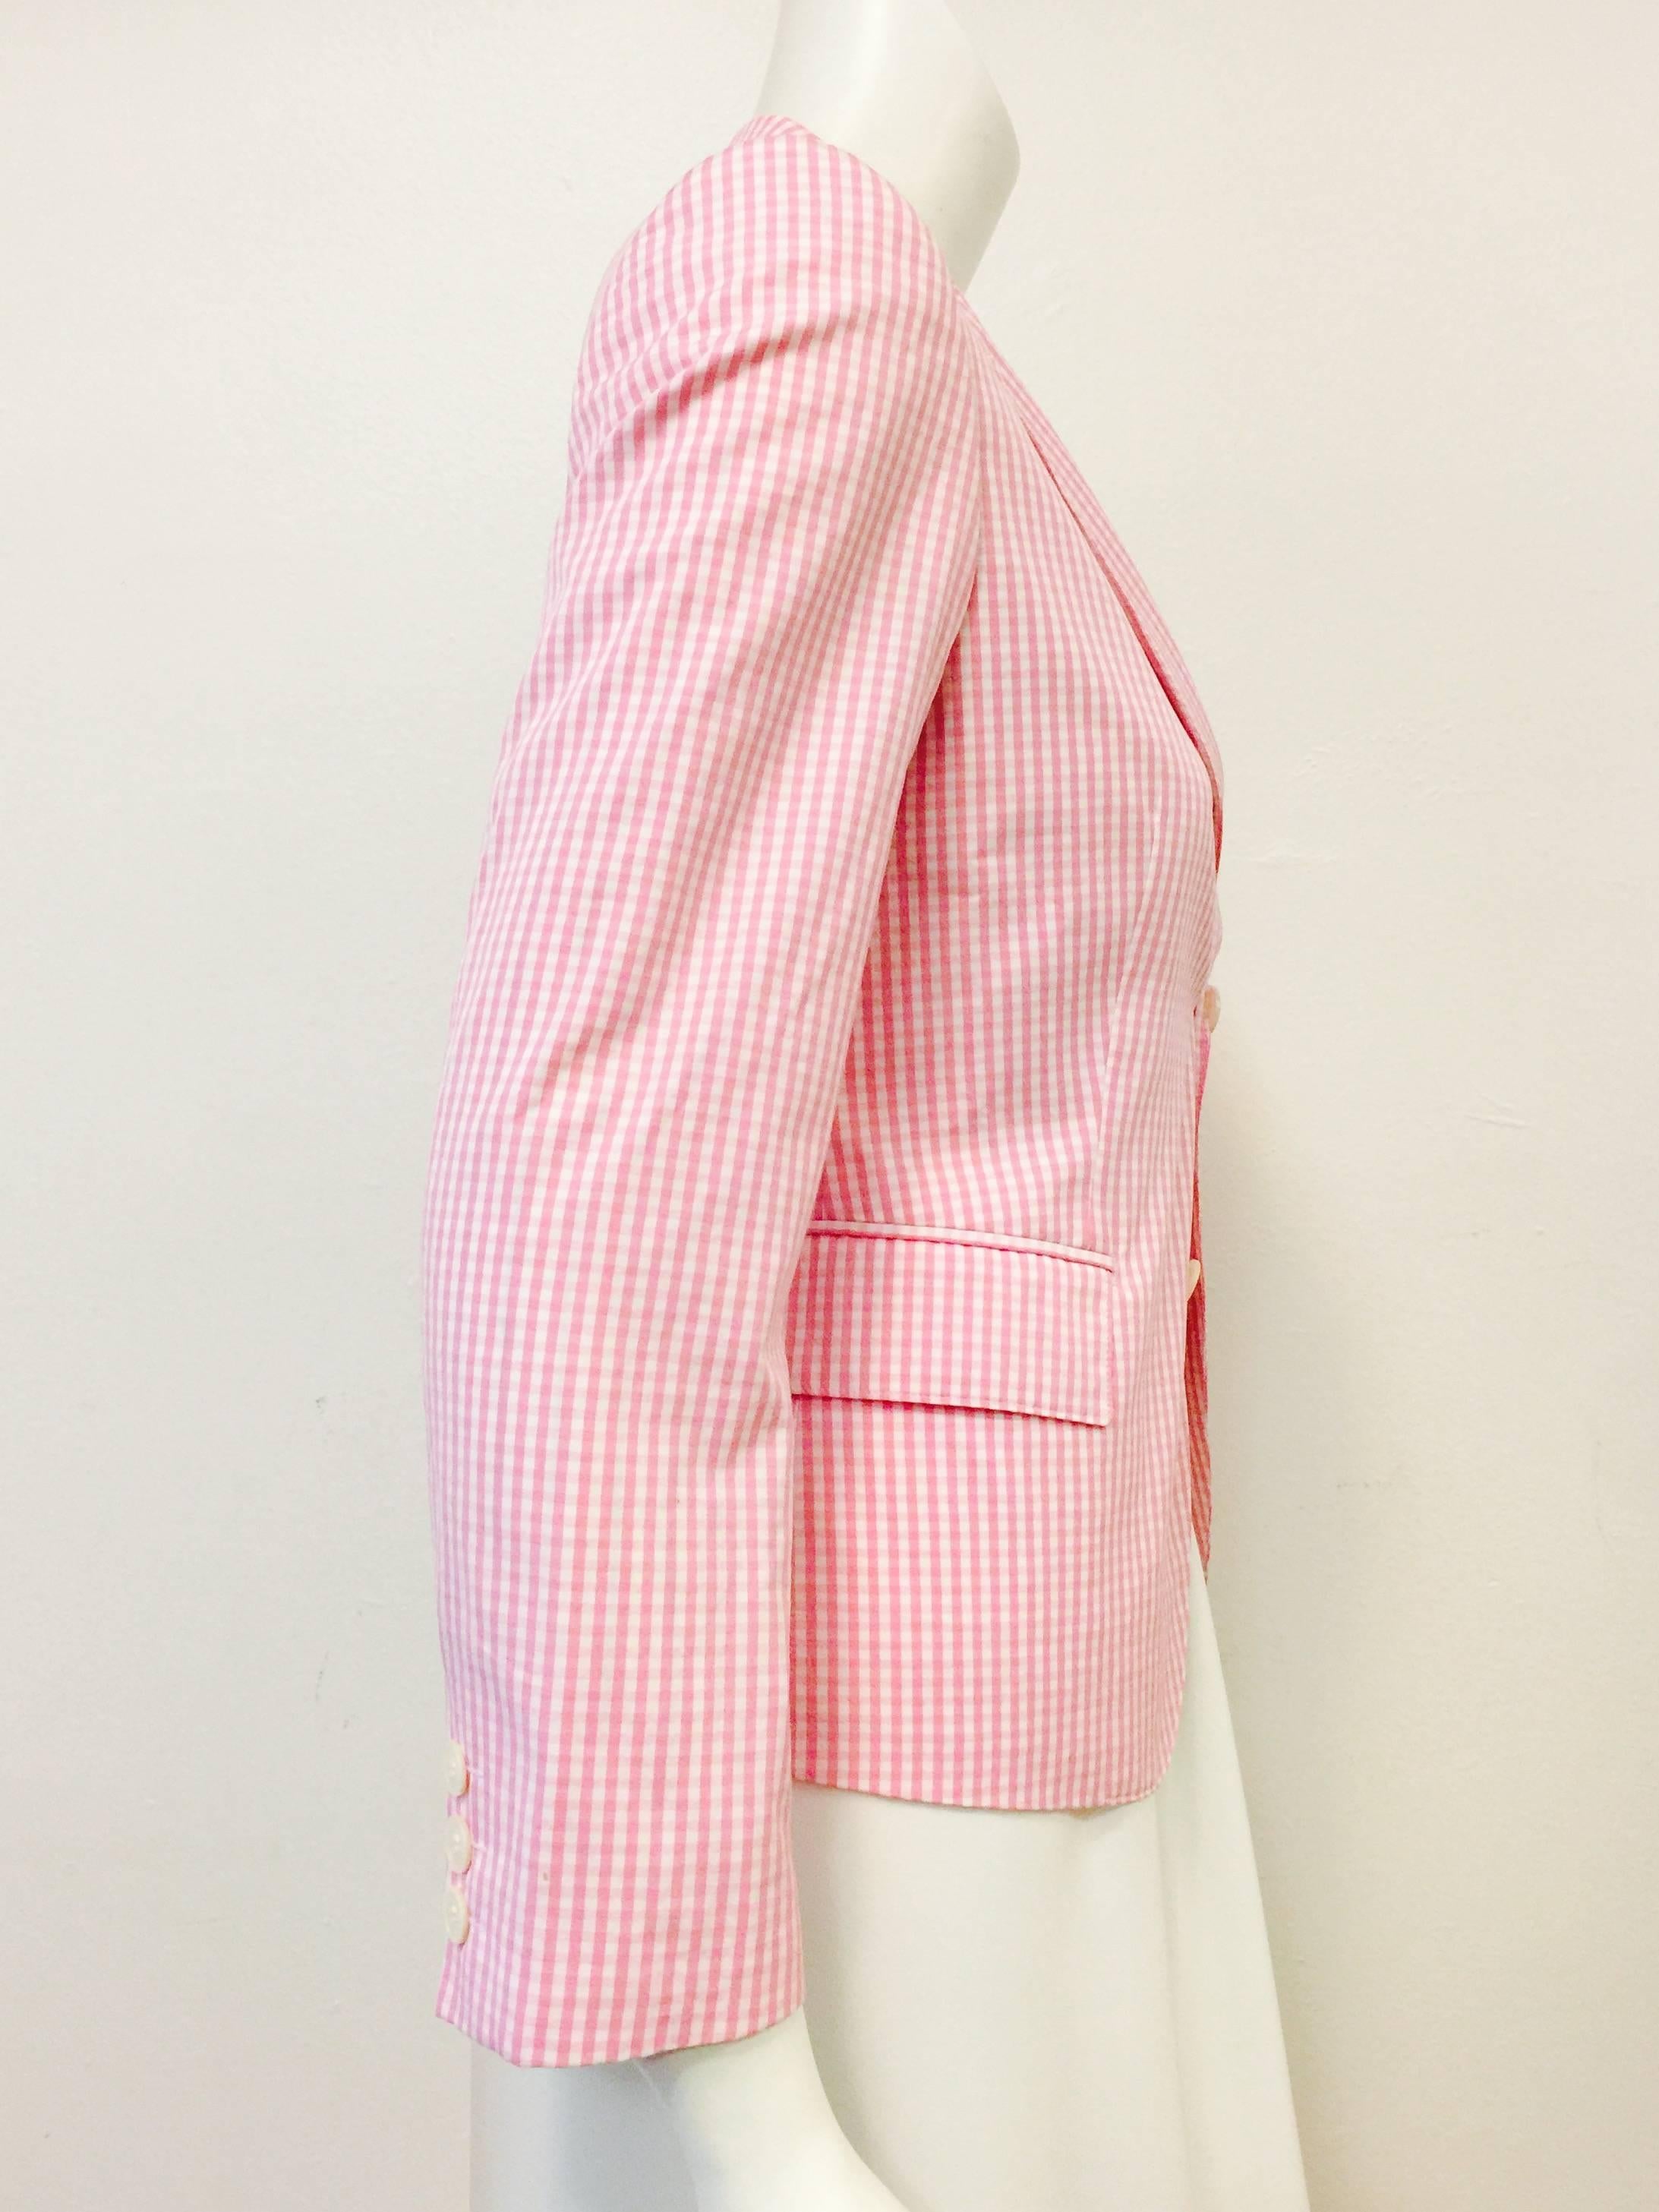 Comme des Garcons by Junya Watanabe Pink and White Gingham Blazer 1